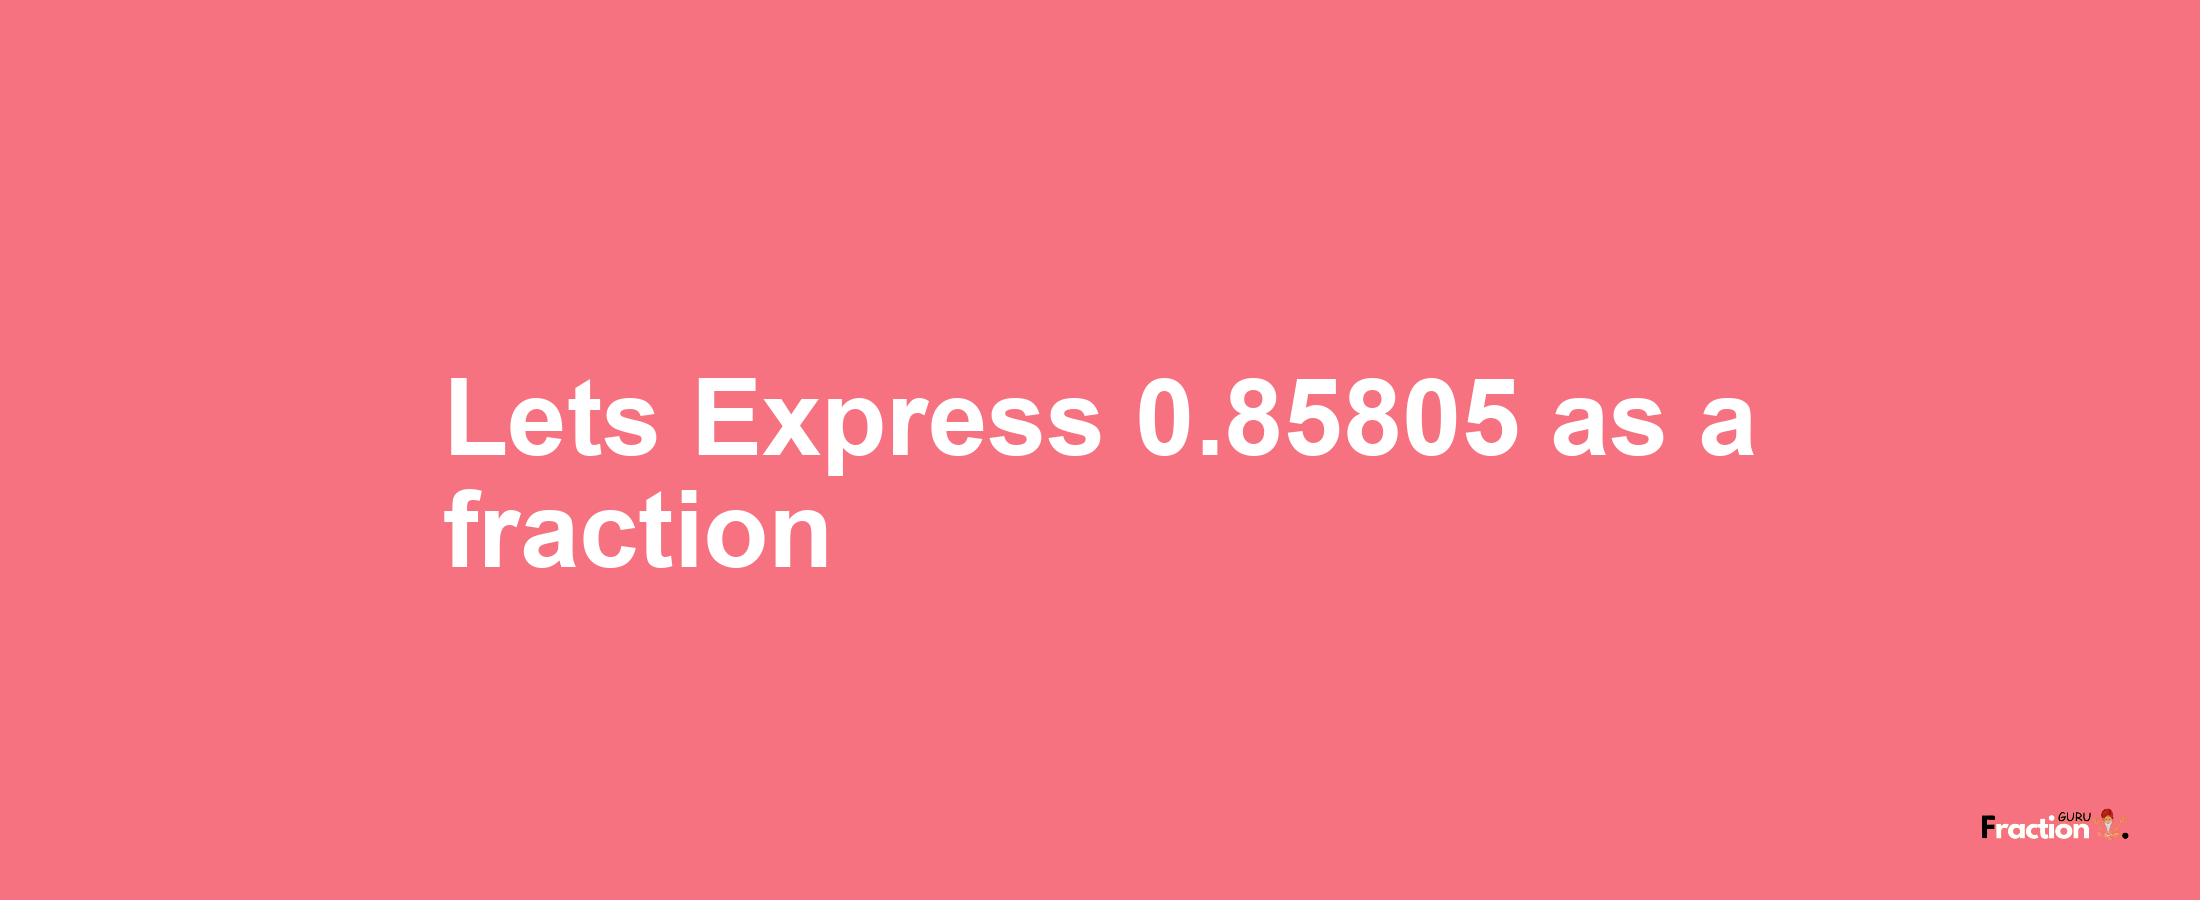 Lets Express 0.85805 as afraction